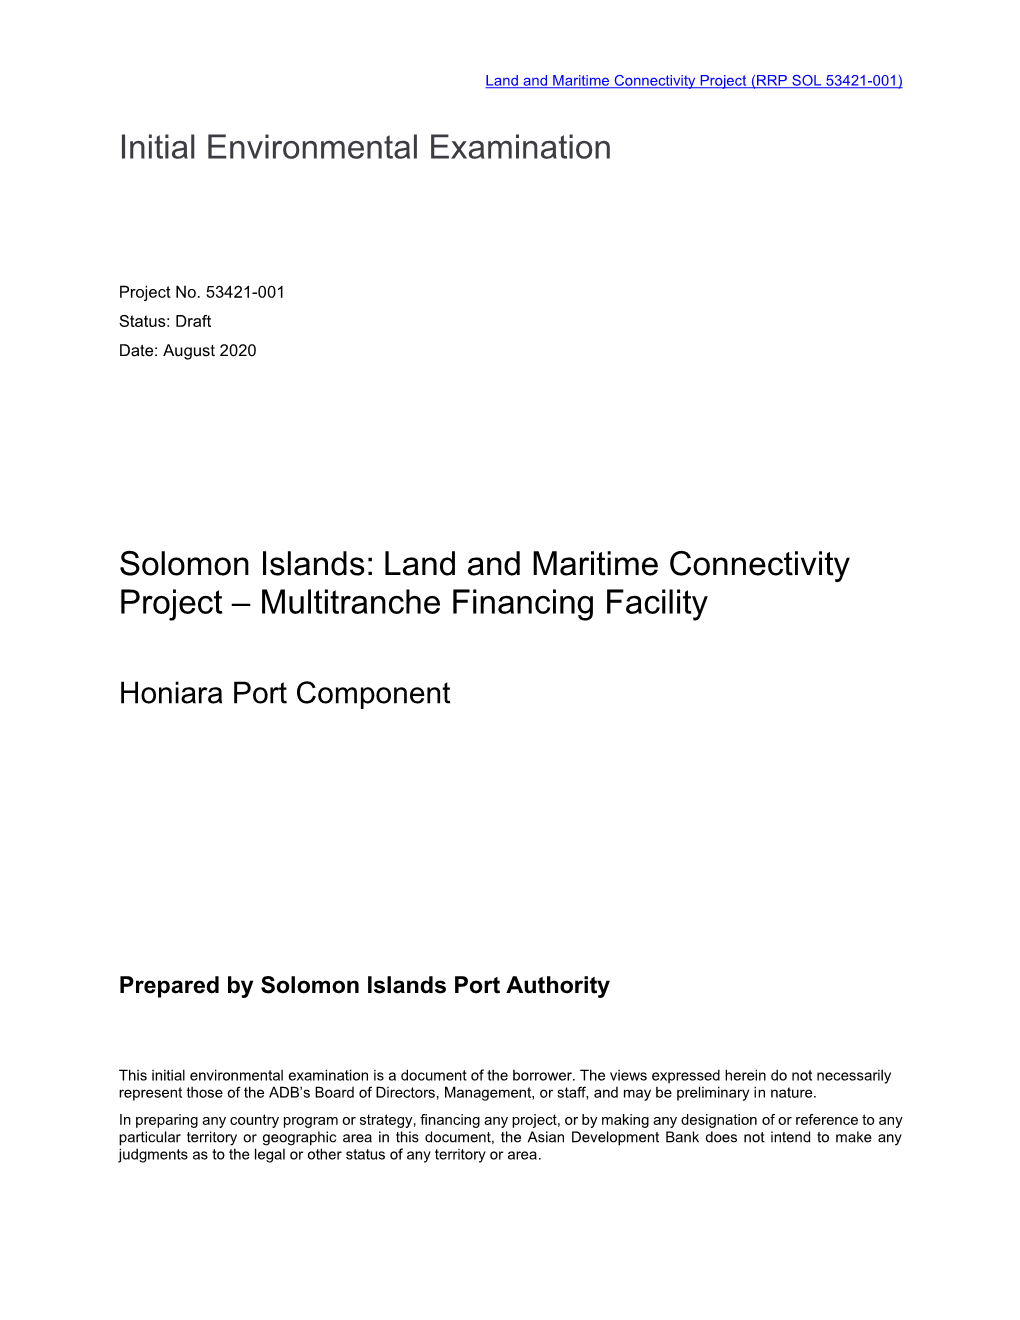 Land and Maritime Connectivity Project: Honiara Port Component